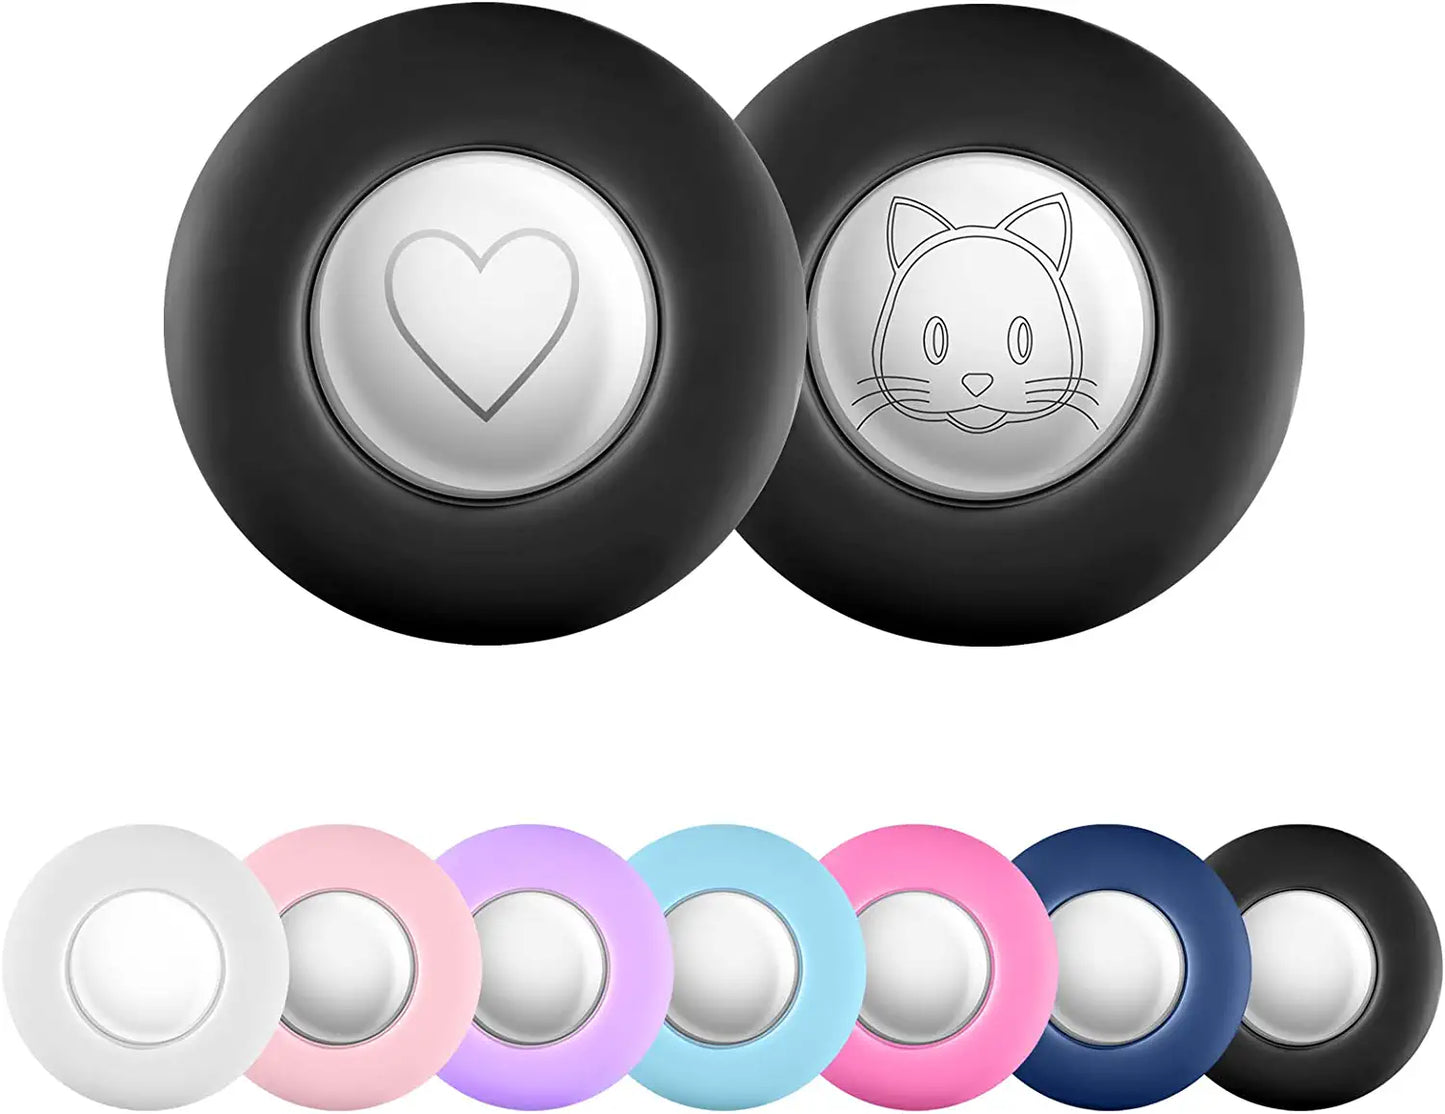 Airtag Cat Collar Holder(2Pack), Silicone Apple Air Tag Case Cover for Smaller than 0.8Inch Pet Collar Harness Loop Cibaabo Electronics > GPS Accessories > GPS Cases Cibaabo   